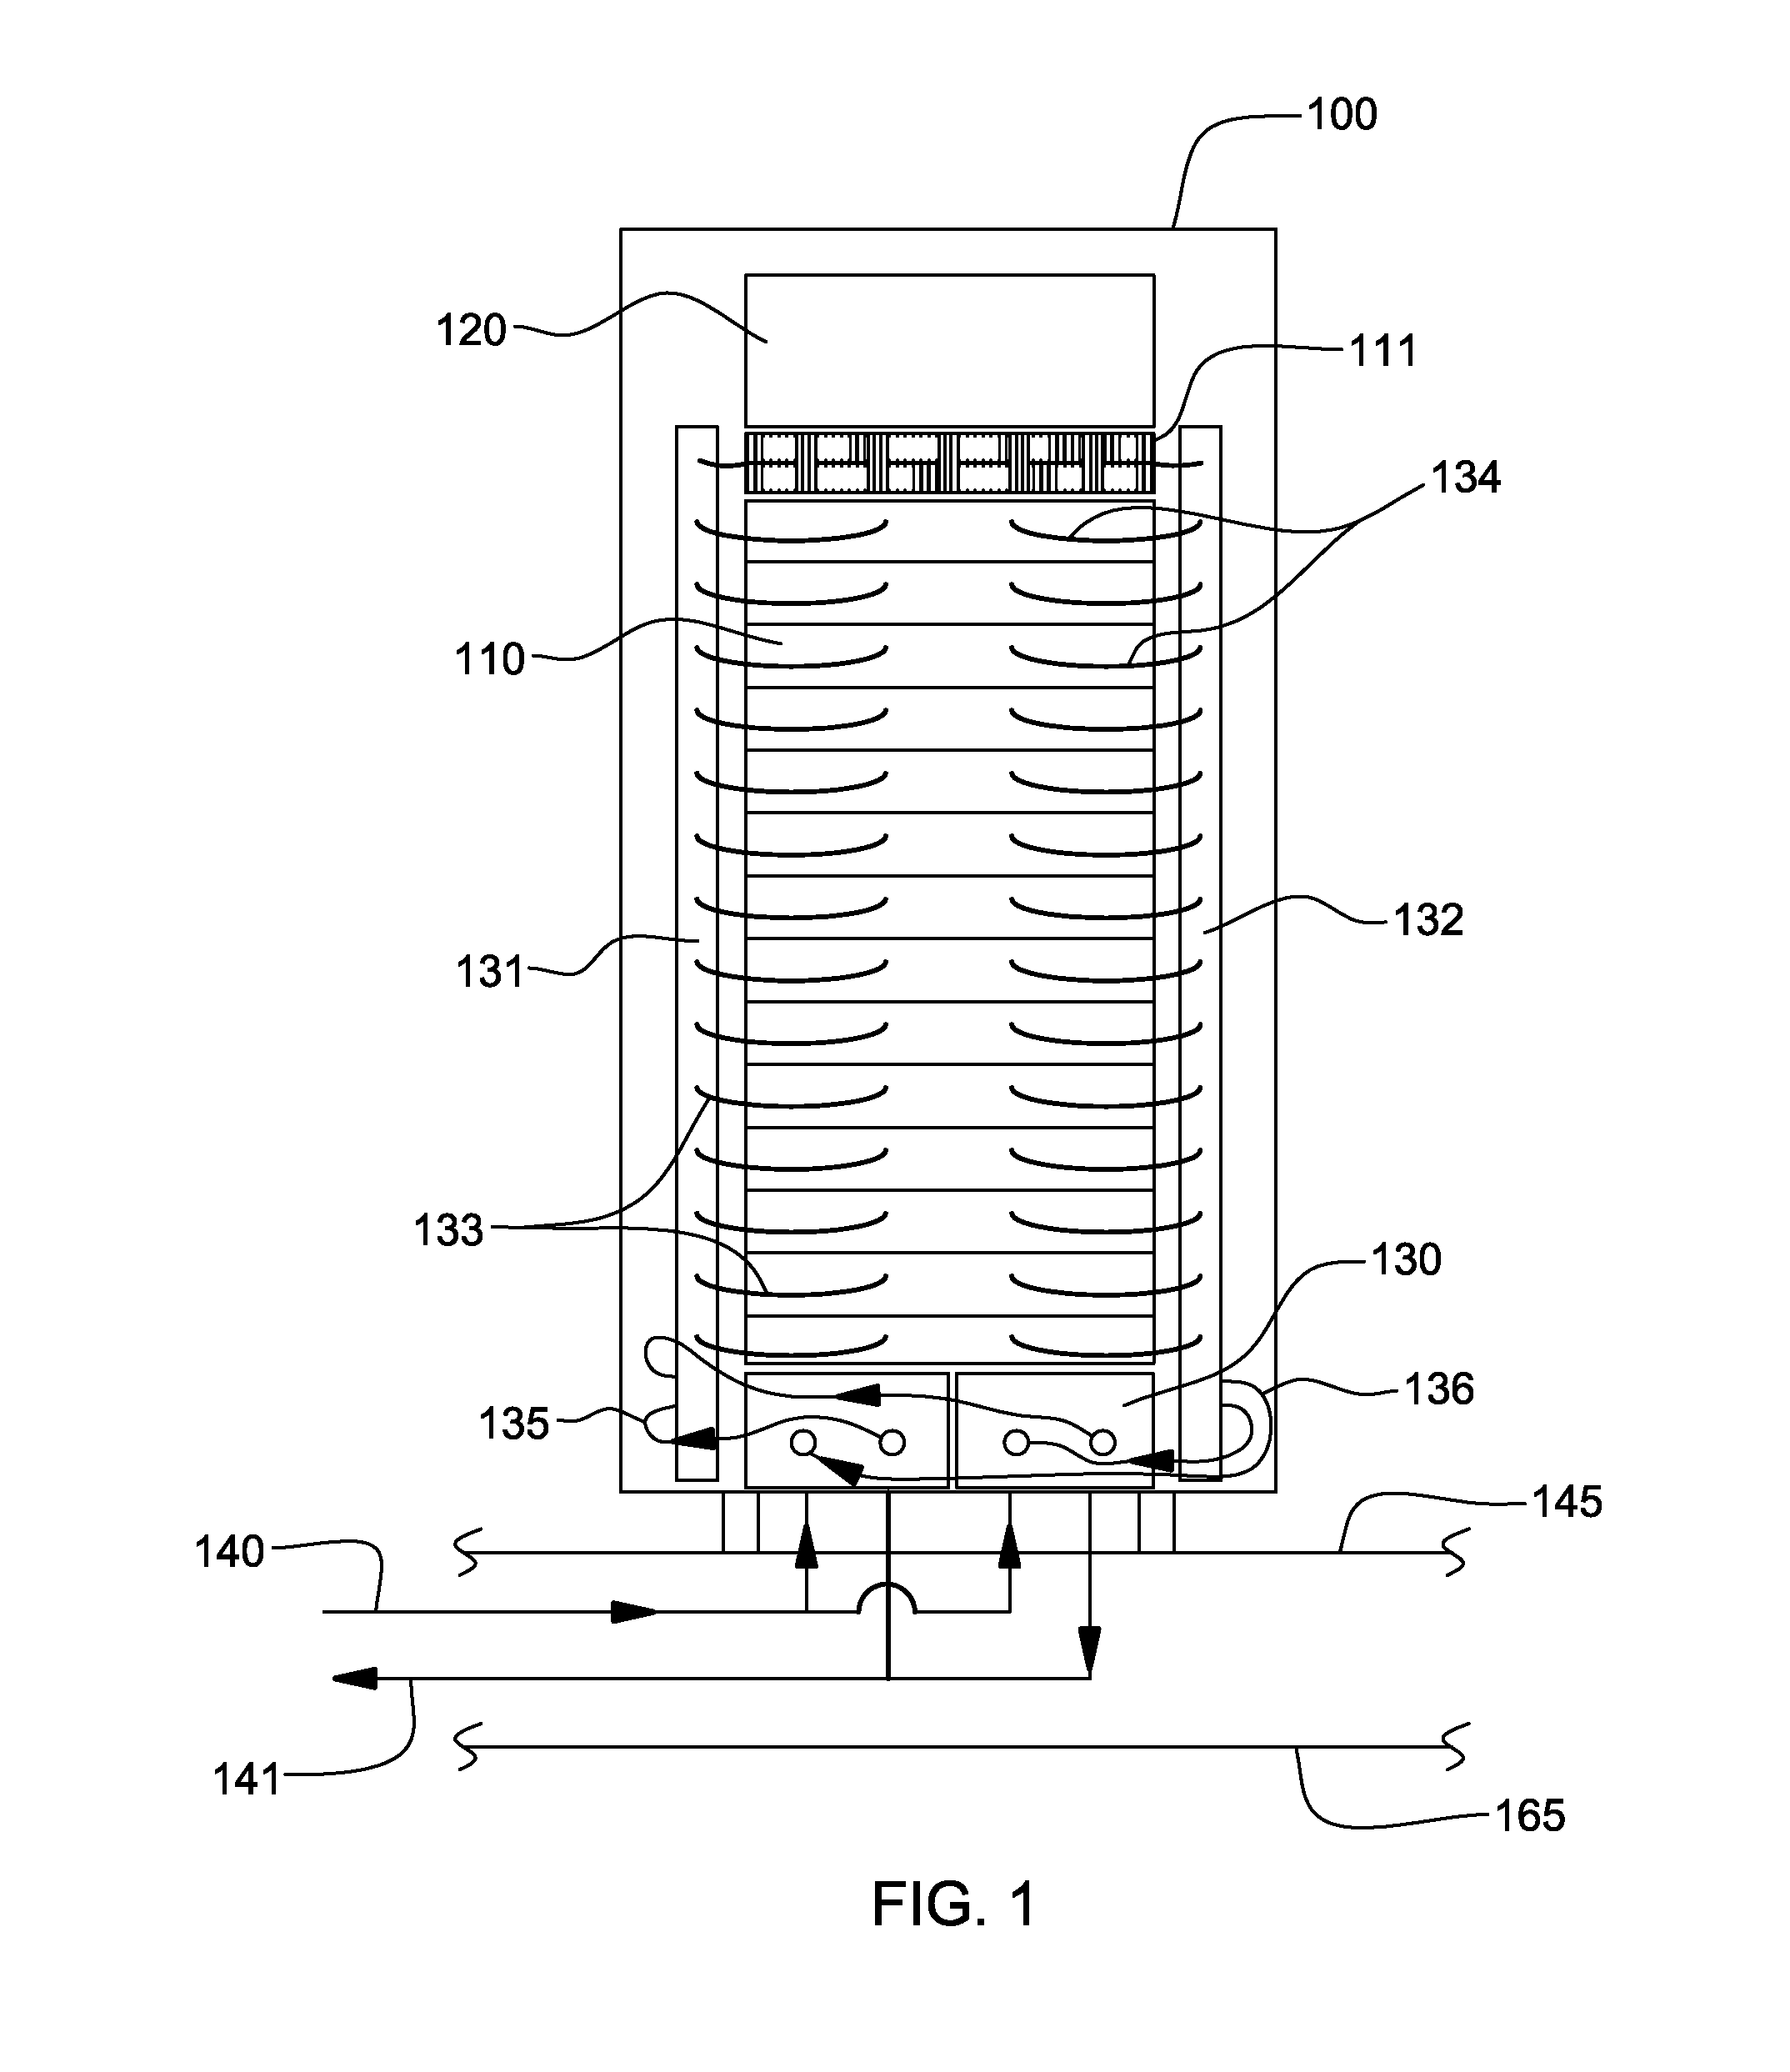 Heat sink structure with a vapor-permeable membrane for two-phase cooling